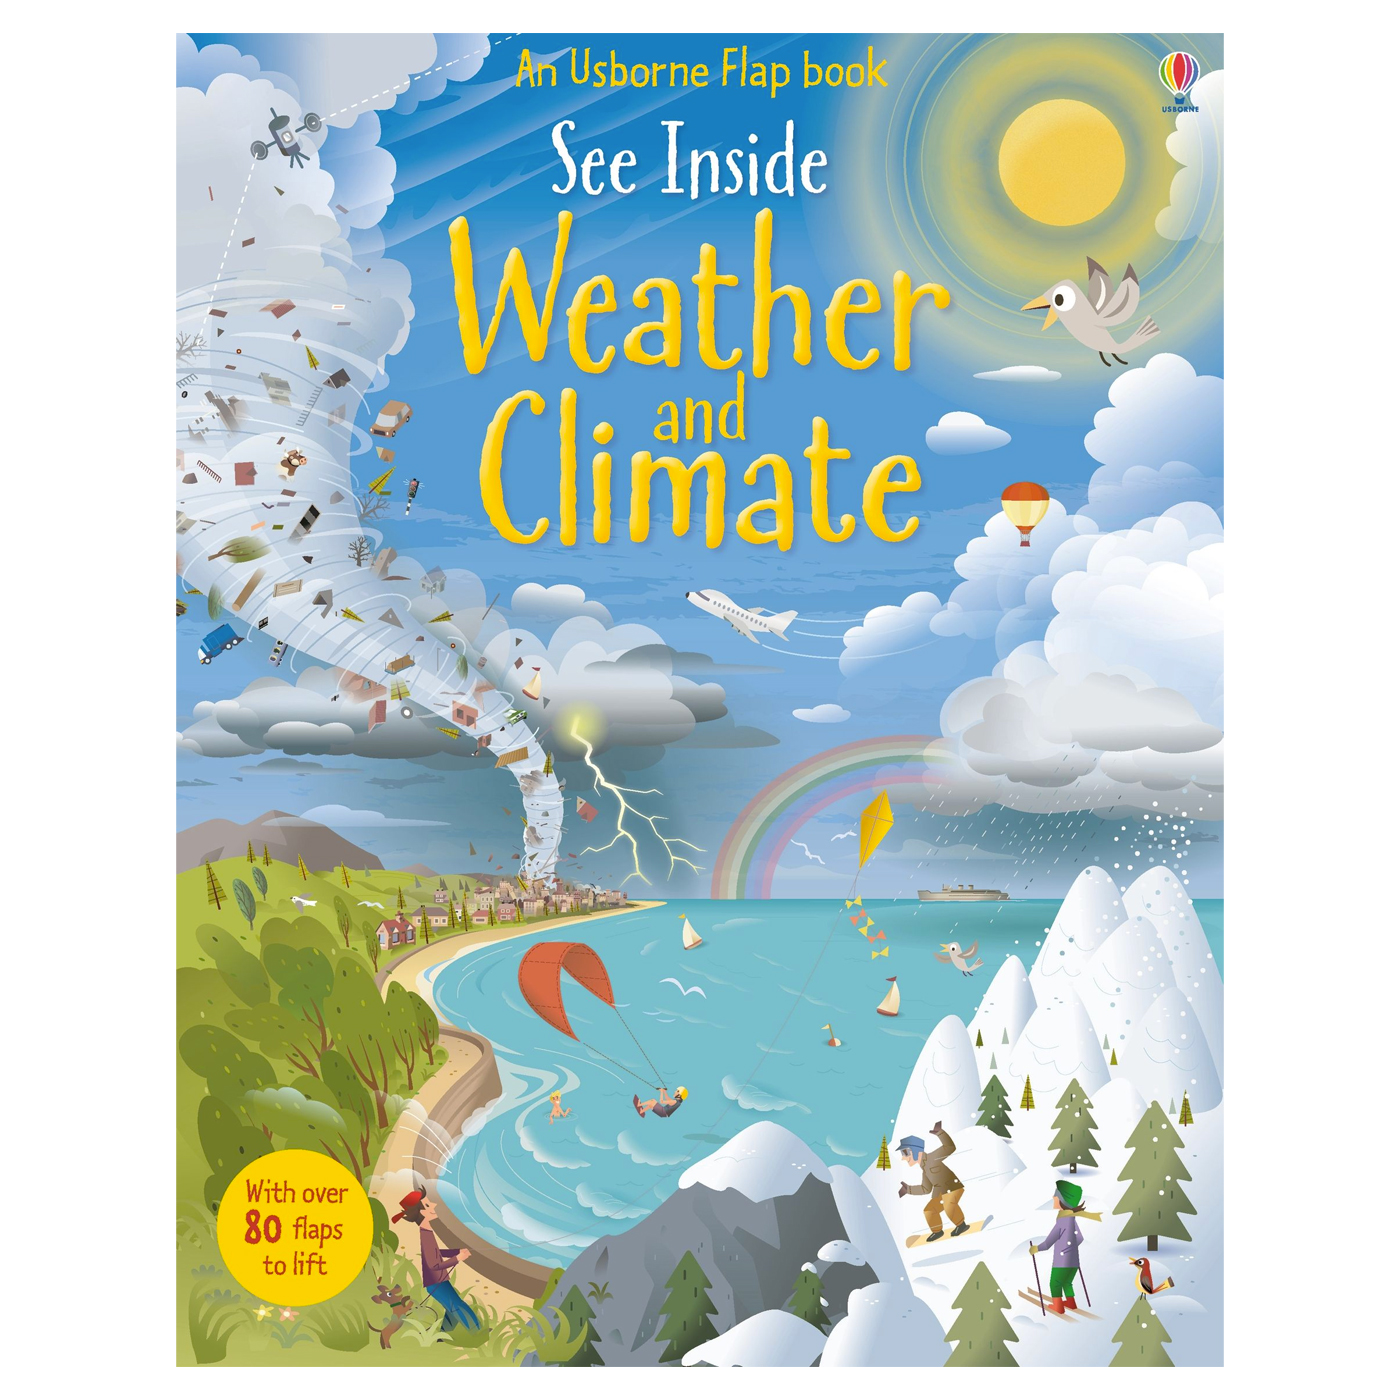  See Inside Weather and Climate